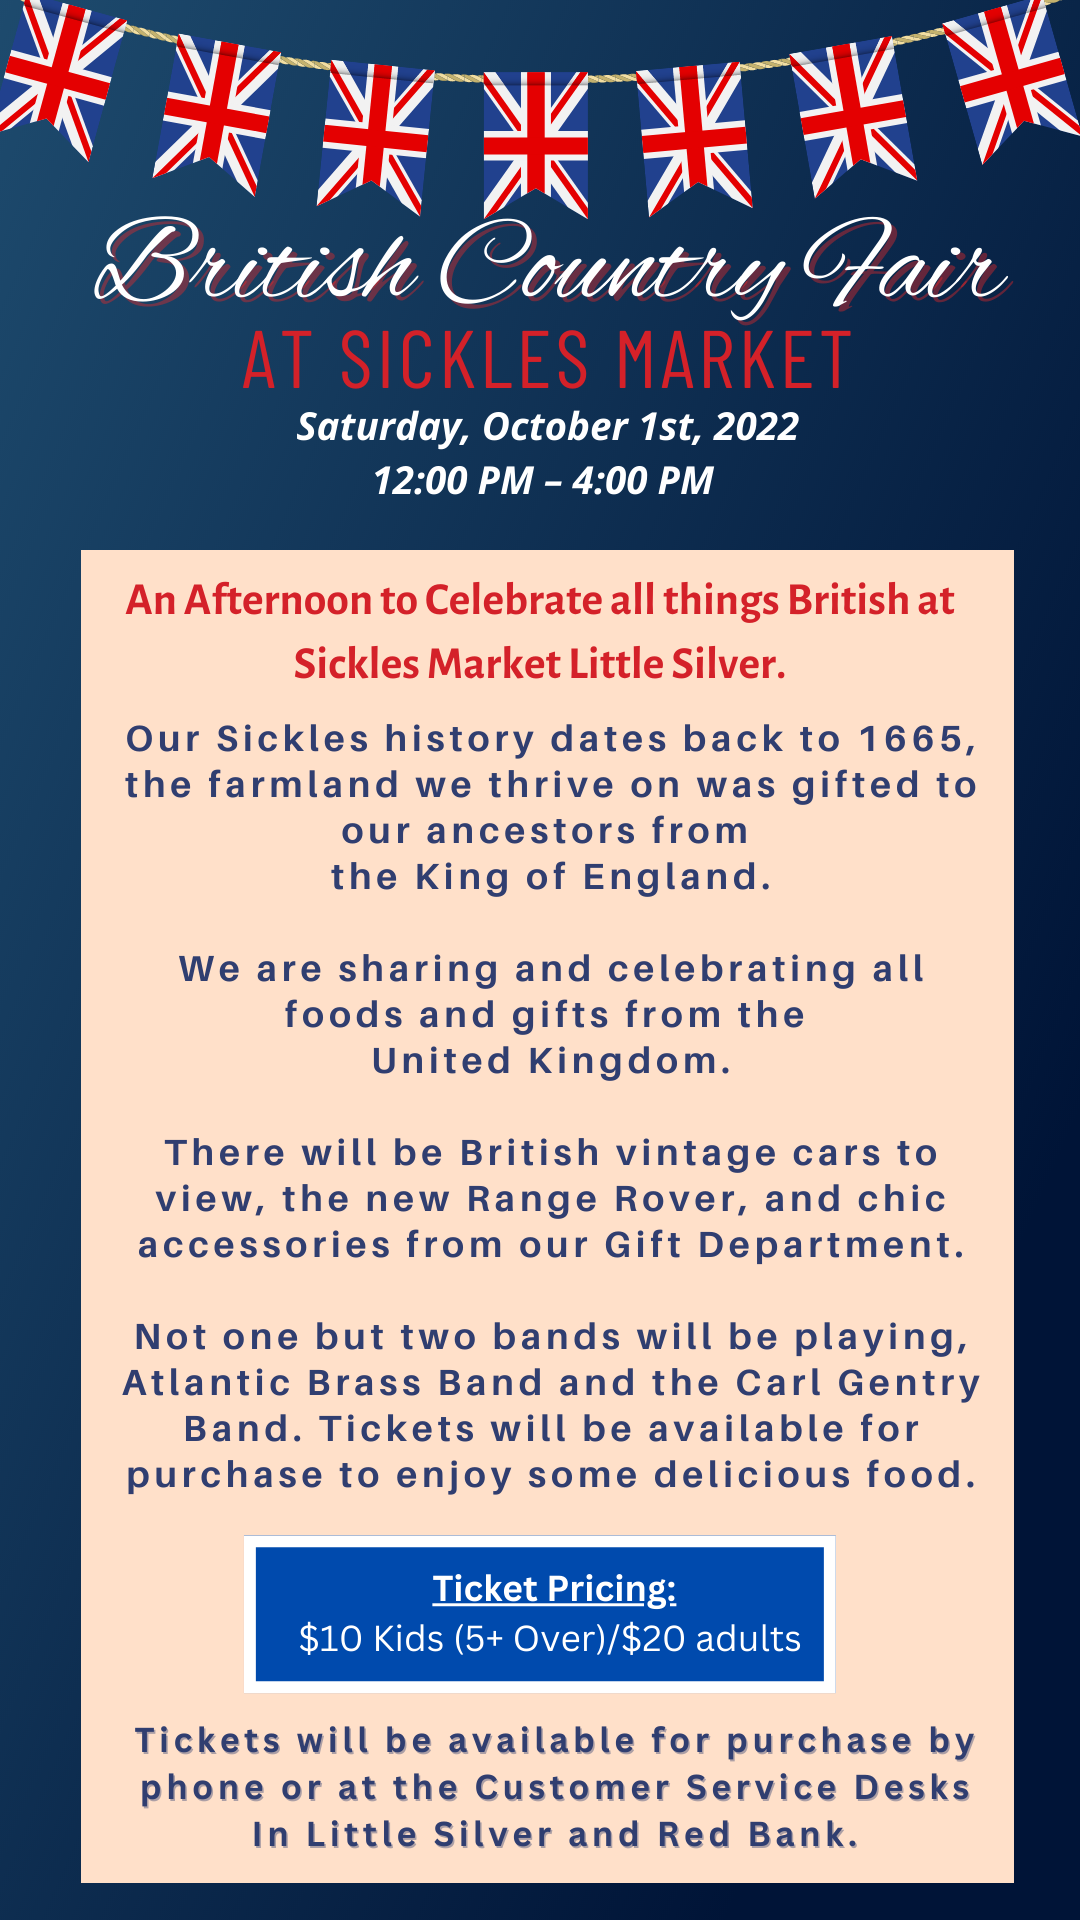 *CANCELLED Carl Gentry Band playing British Country Fair at Sickles Market